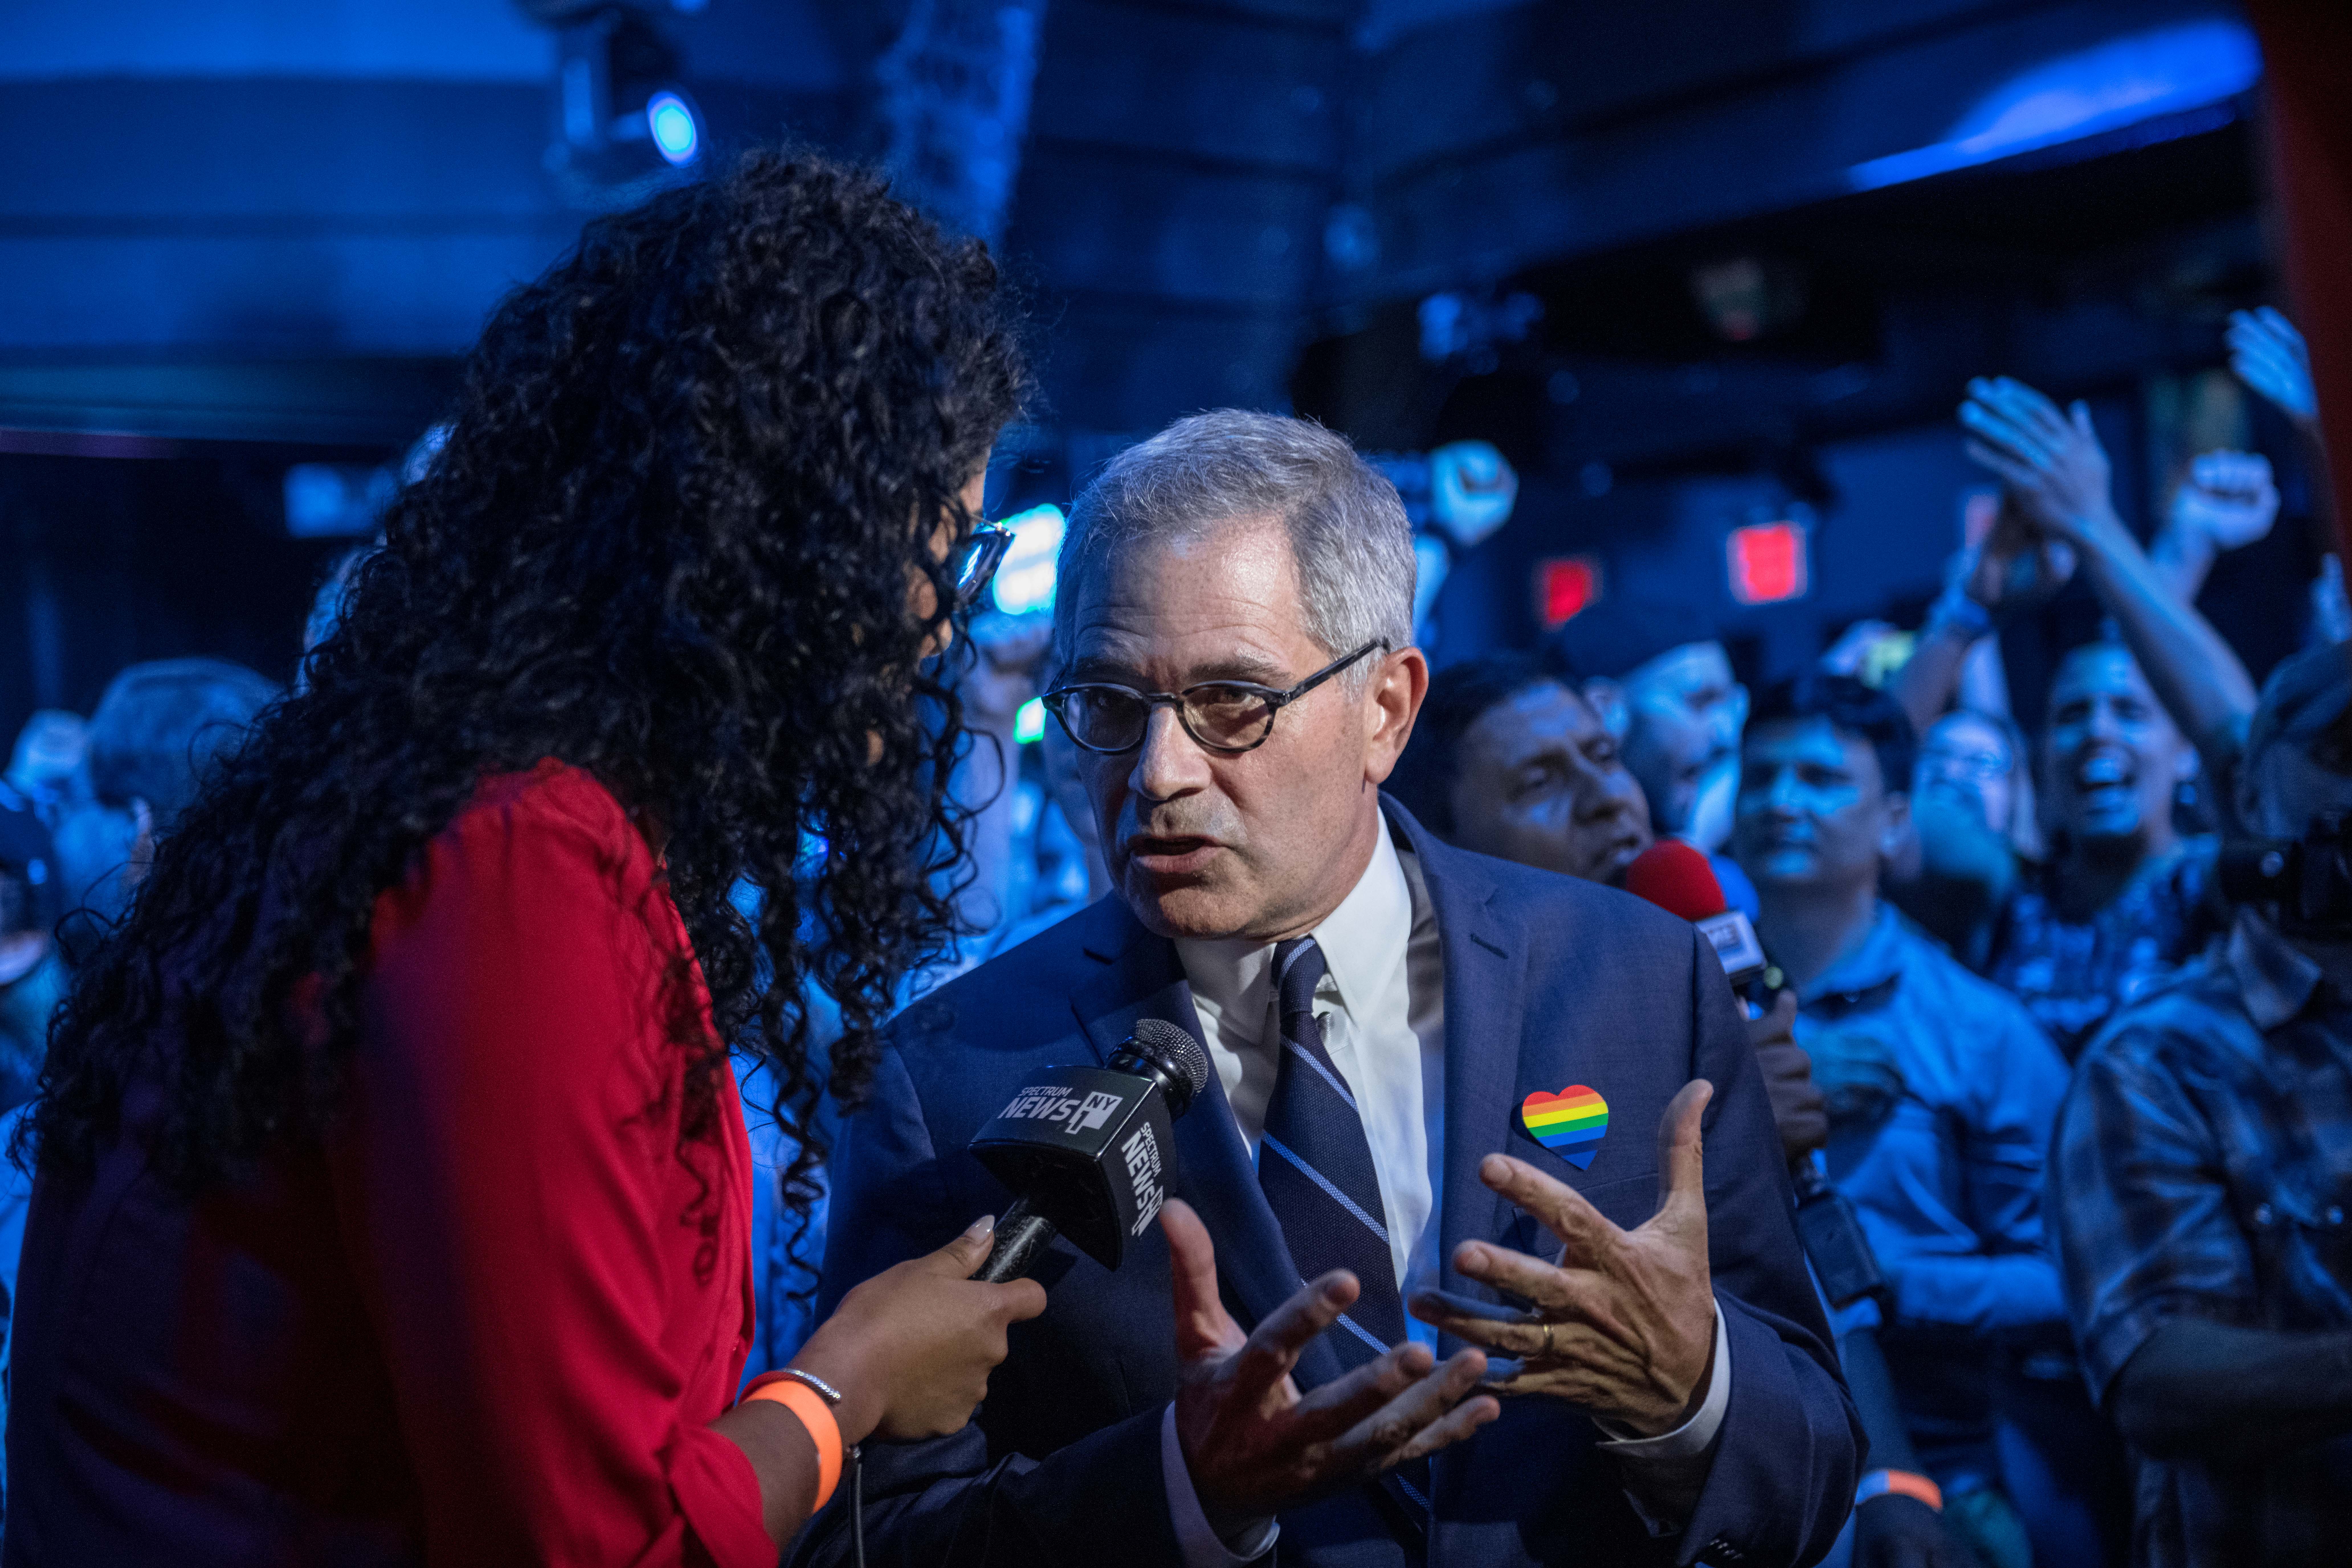 NEW YORK, NY - JUNE 25: Philadelphia District Attorney Larry Krasner speaks to a reporter at of the election party of public defender Tiffany Caban moments before she claimed victory in the in the Queens District Attorney Democratic Primary election, June 25, 2019 in the Queens borough of New York City. (Photo by Scott Heins/Getty Images)